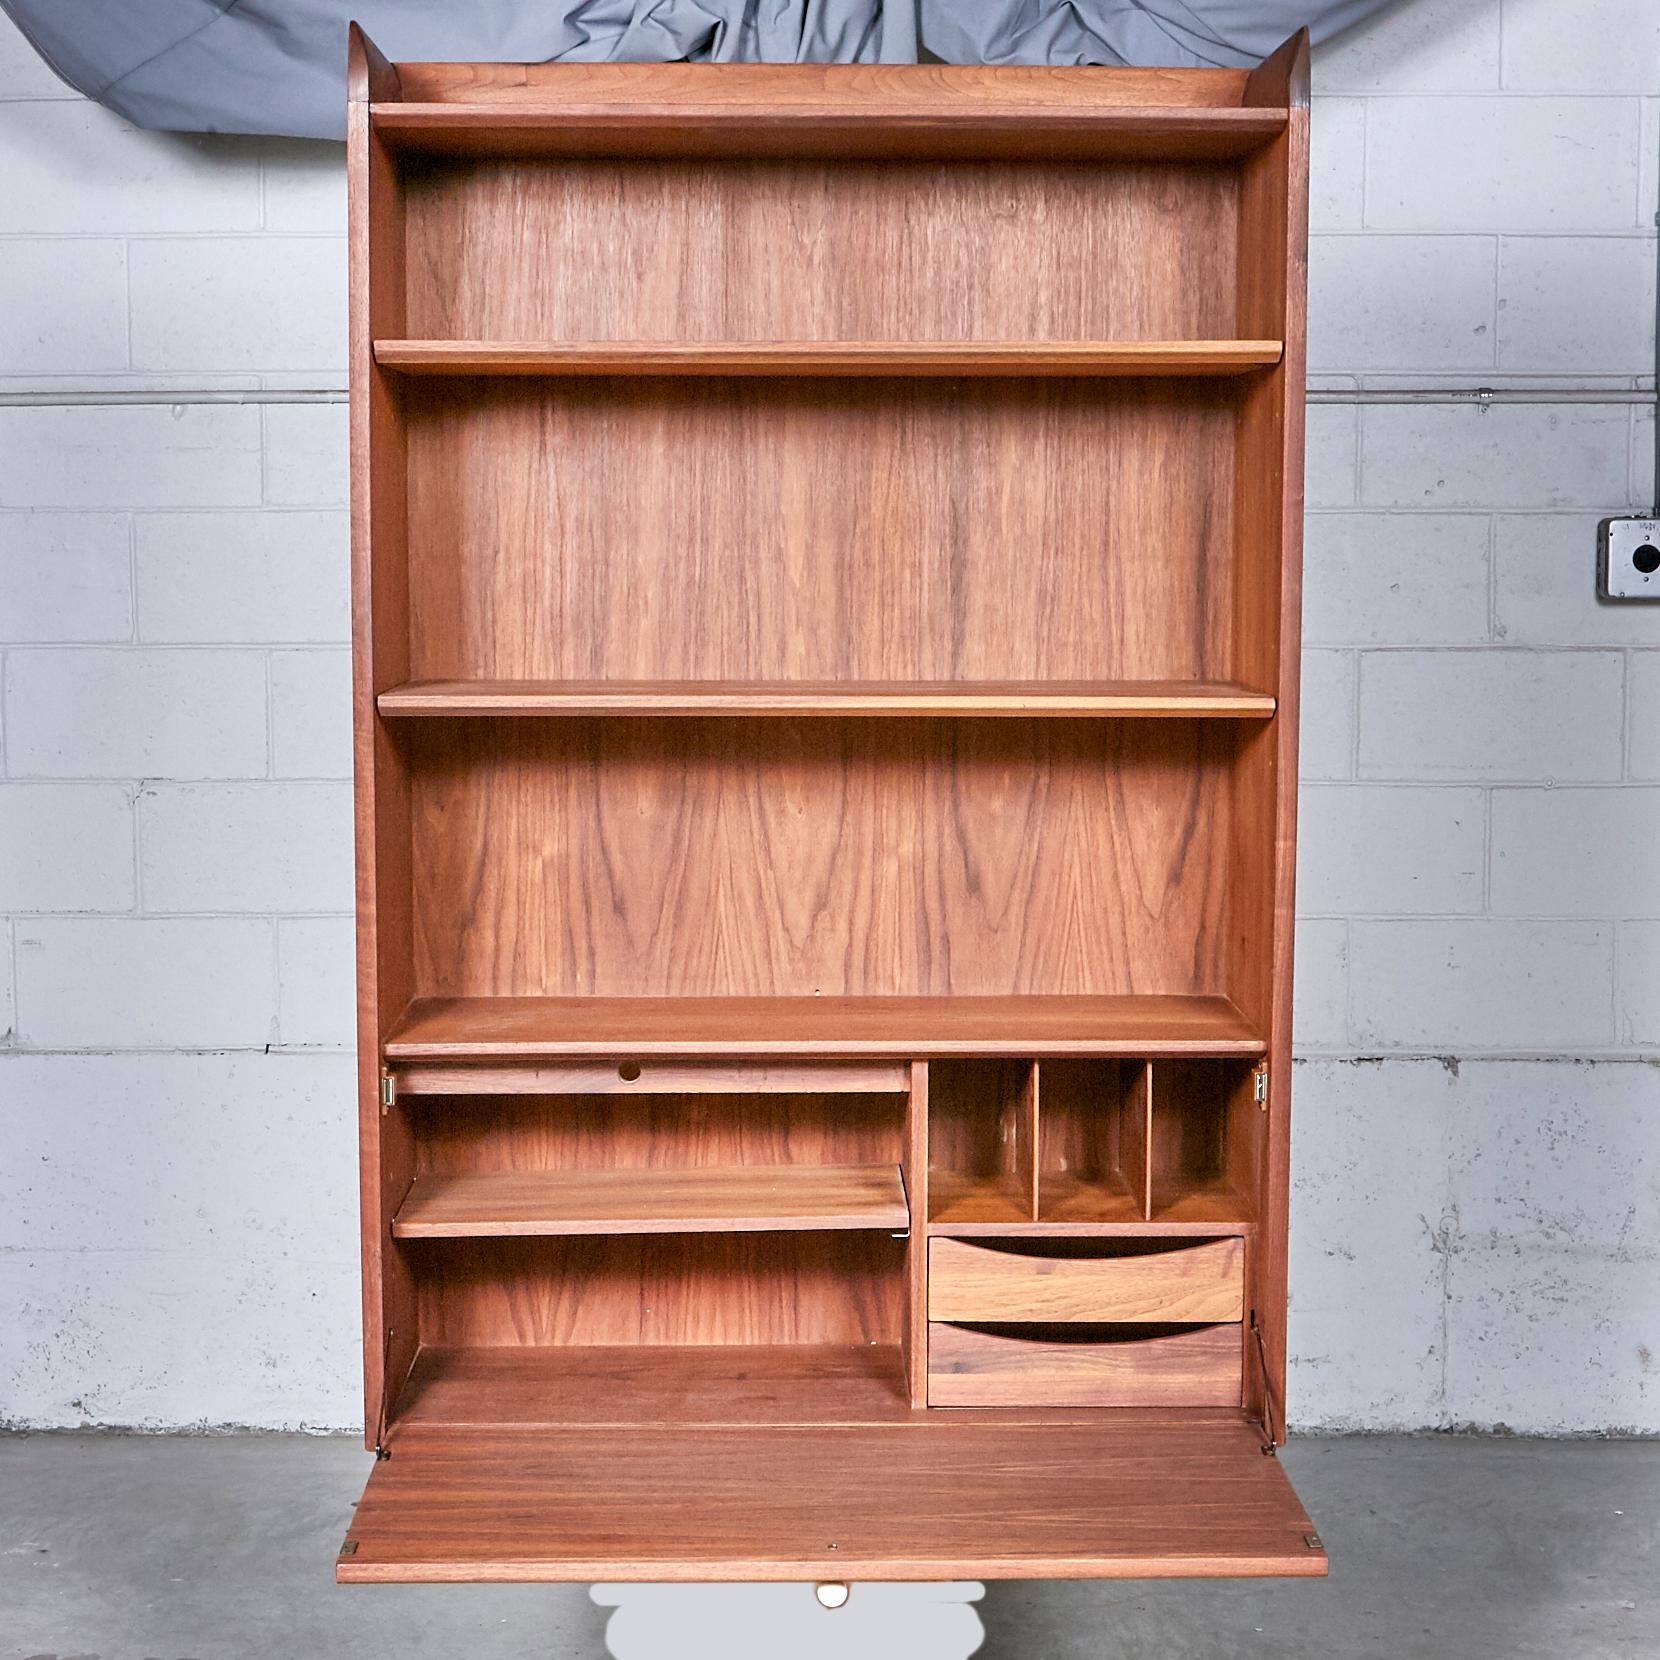 Vintage 1960s walnut floating wall cabinet designed by Kipp Stewart for Drexel Furniture Co. The top of the cabinet has shelving and the bottom is a writing desk with shelves and drawers for storage. Hardware to hang the shelf is included. Marked.